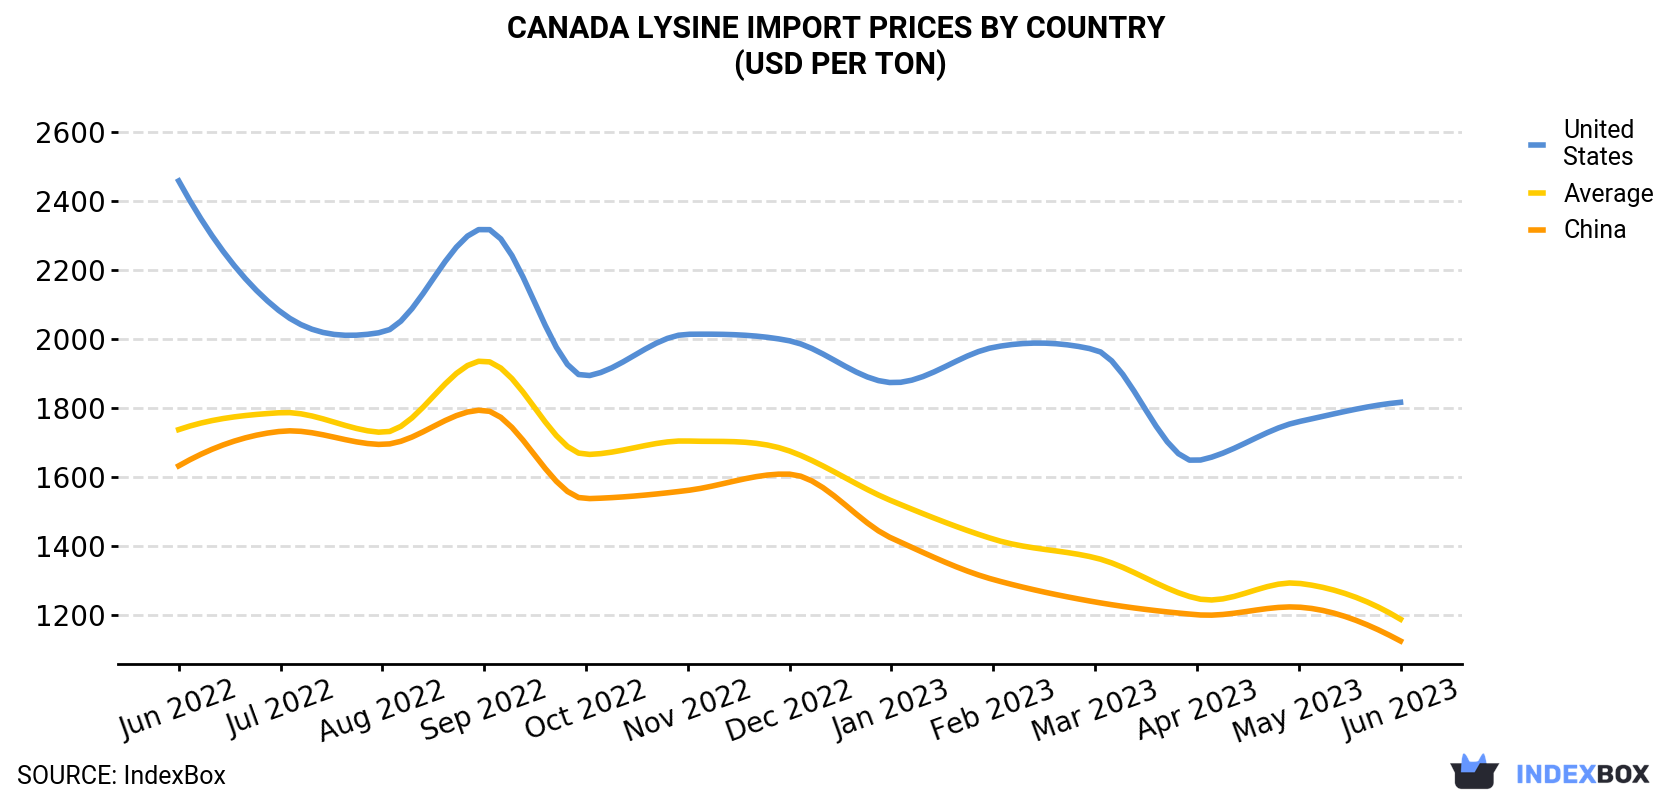 Canada Lysine Import Prices By Country (USD Per Ton)